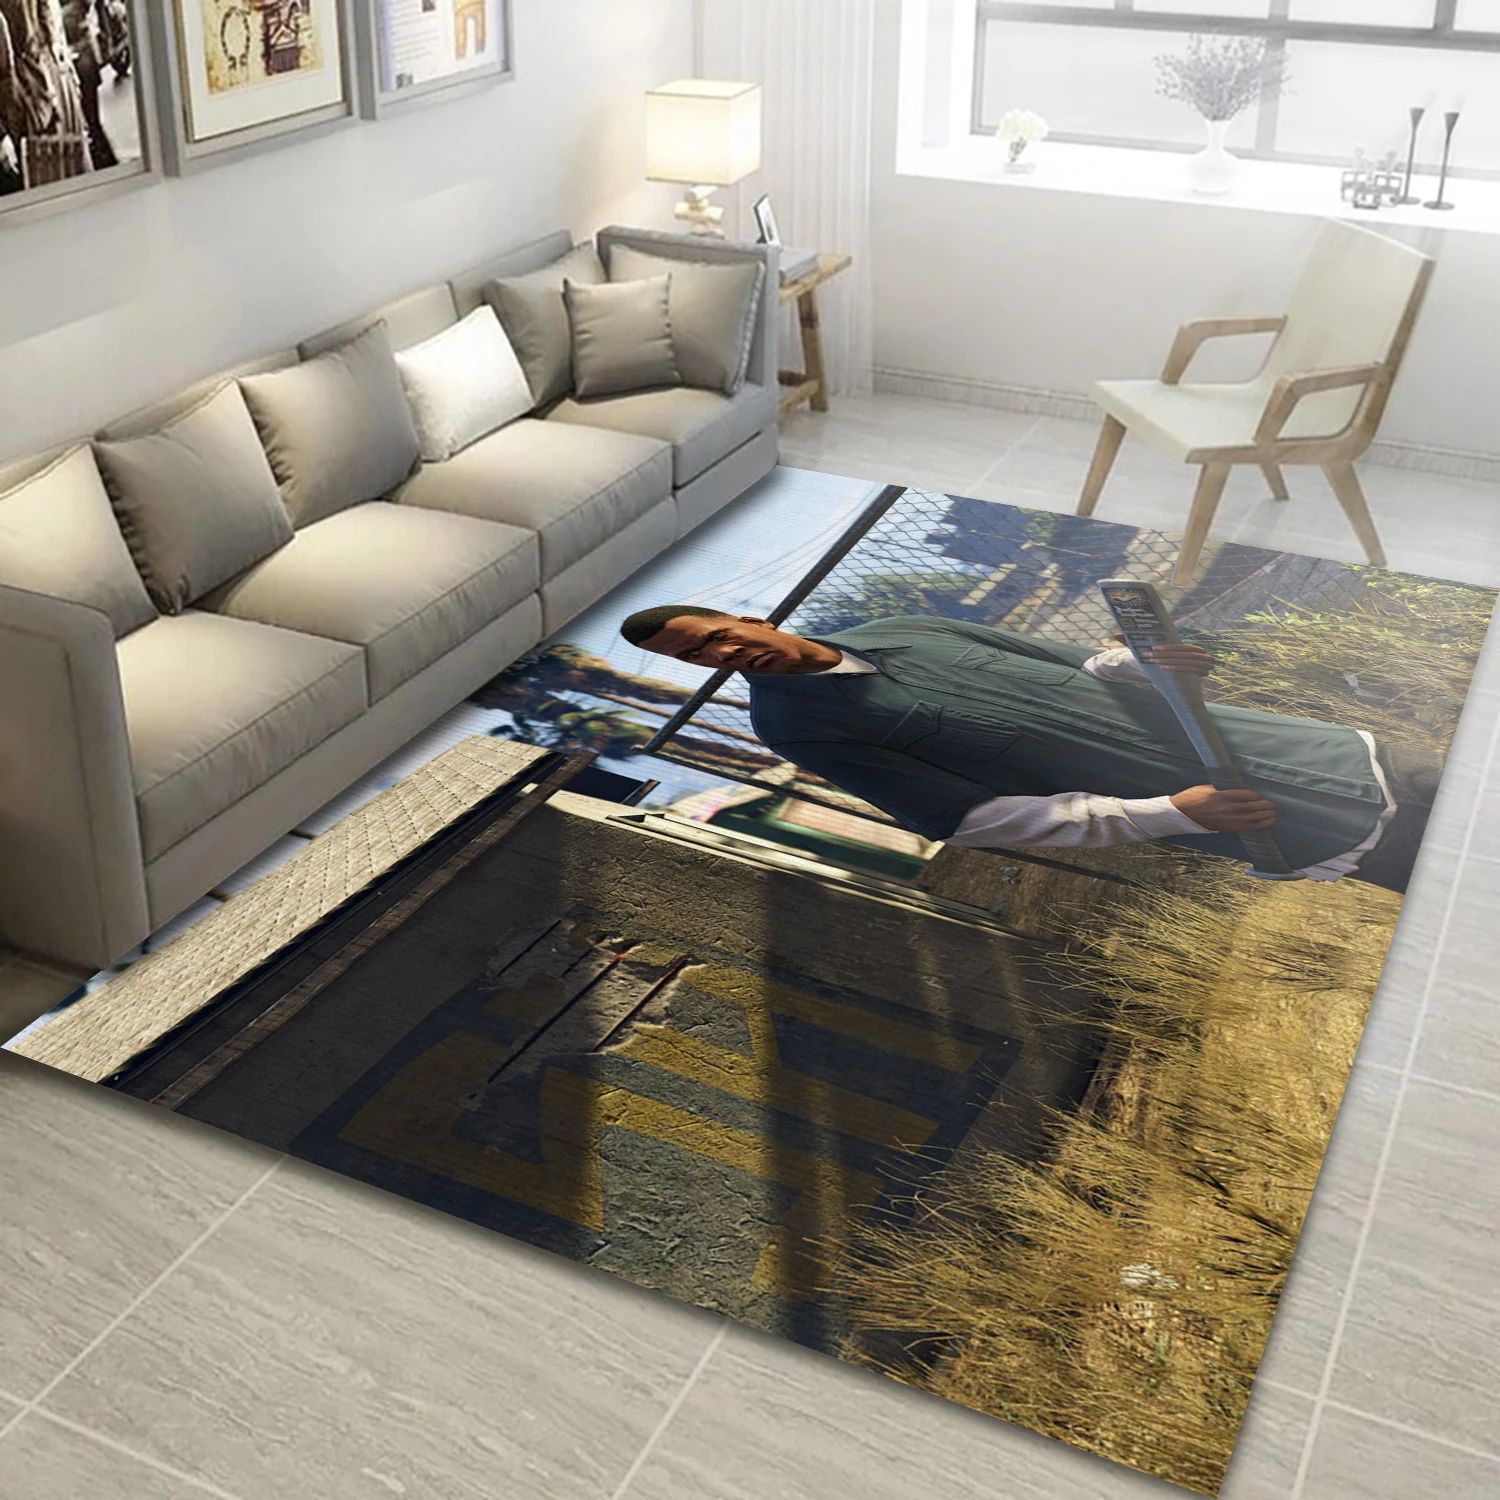 Grand Theft Auto V Game Area Rug Carpet, Bedroom Rug - Christmas Gift Decor - Indoor Outdoor Rugs